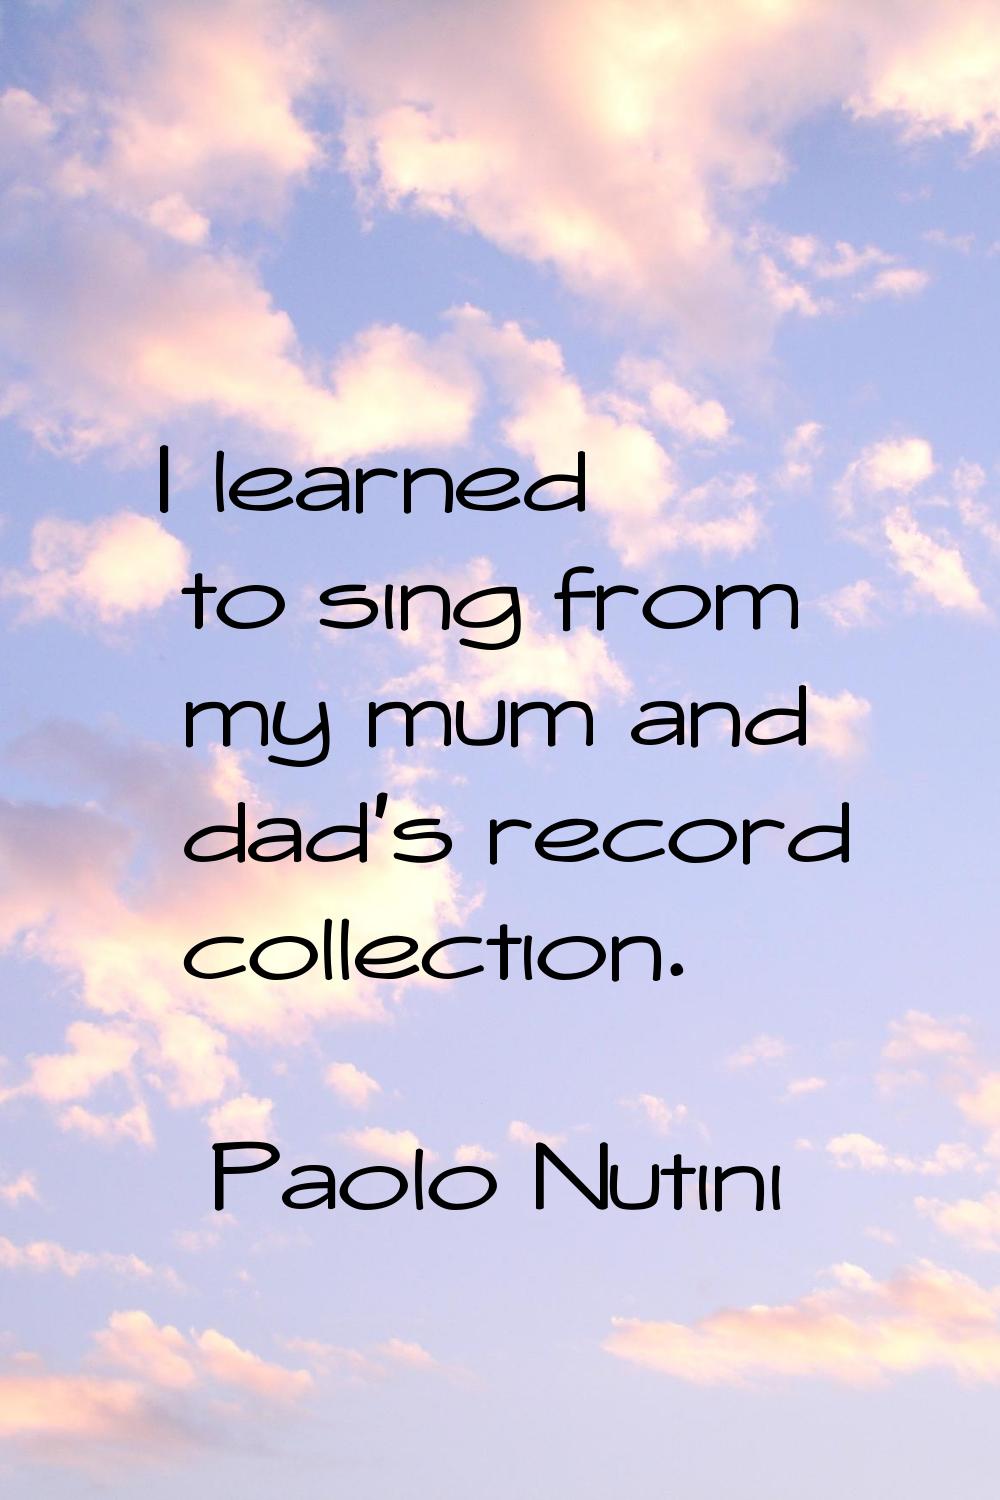 I learned to sing from my mum and dad's record collection.